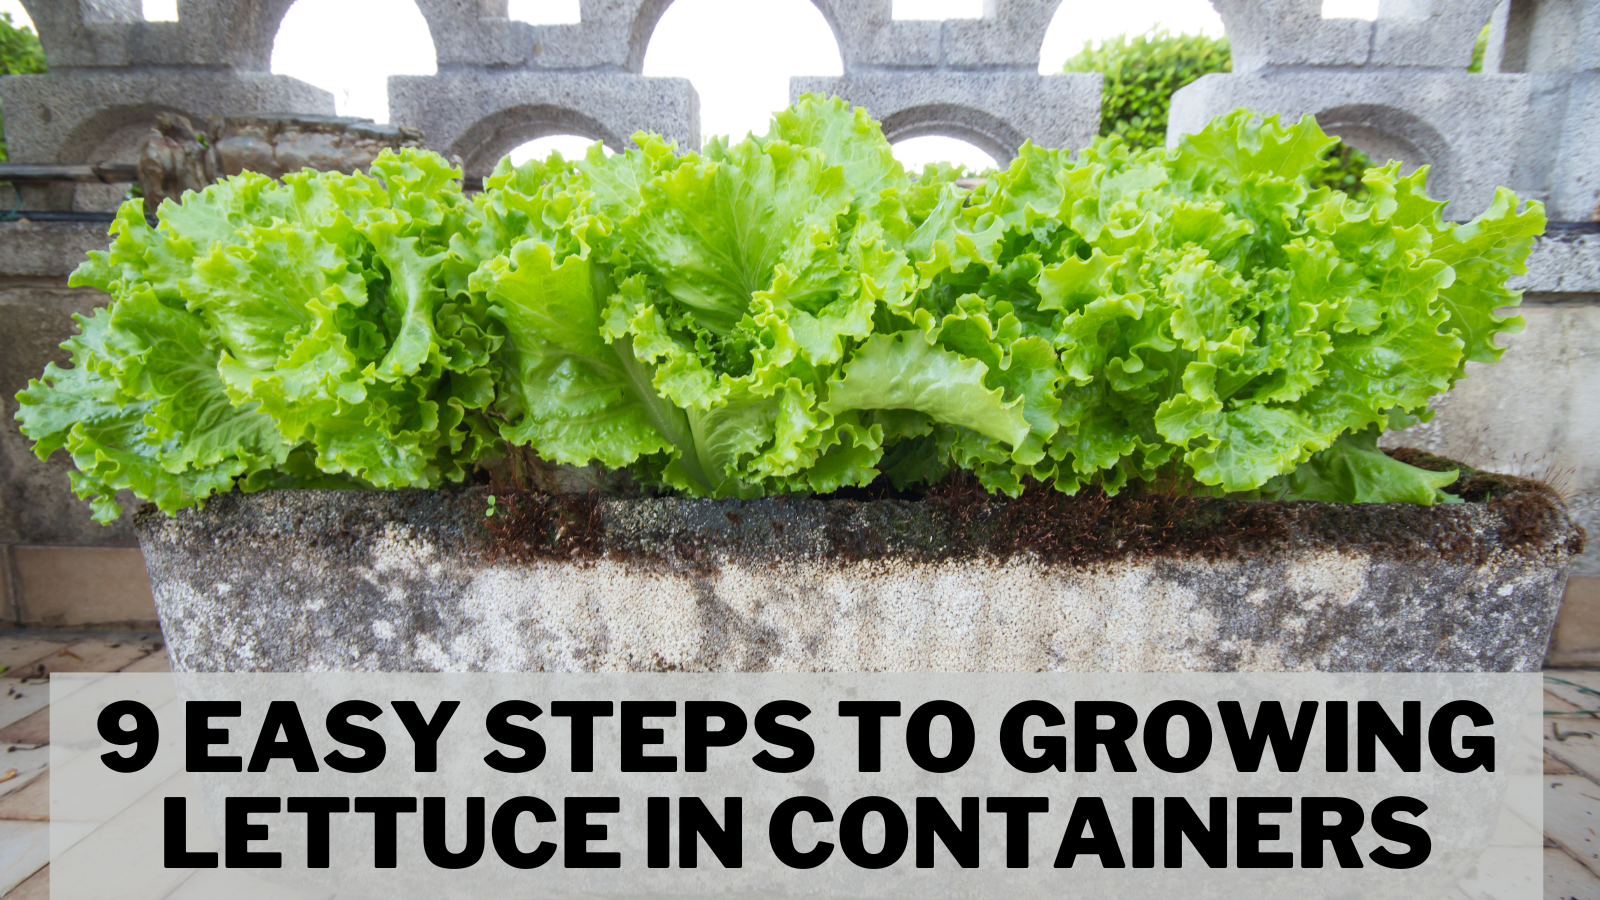 Conclusion To The 9 Easy Steps To Growing Lettuce In Containers